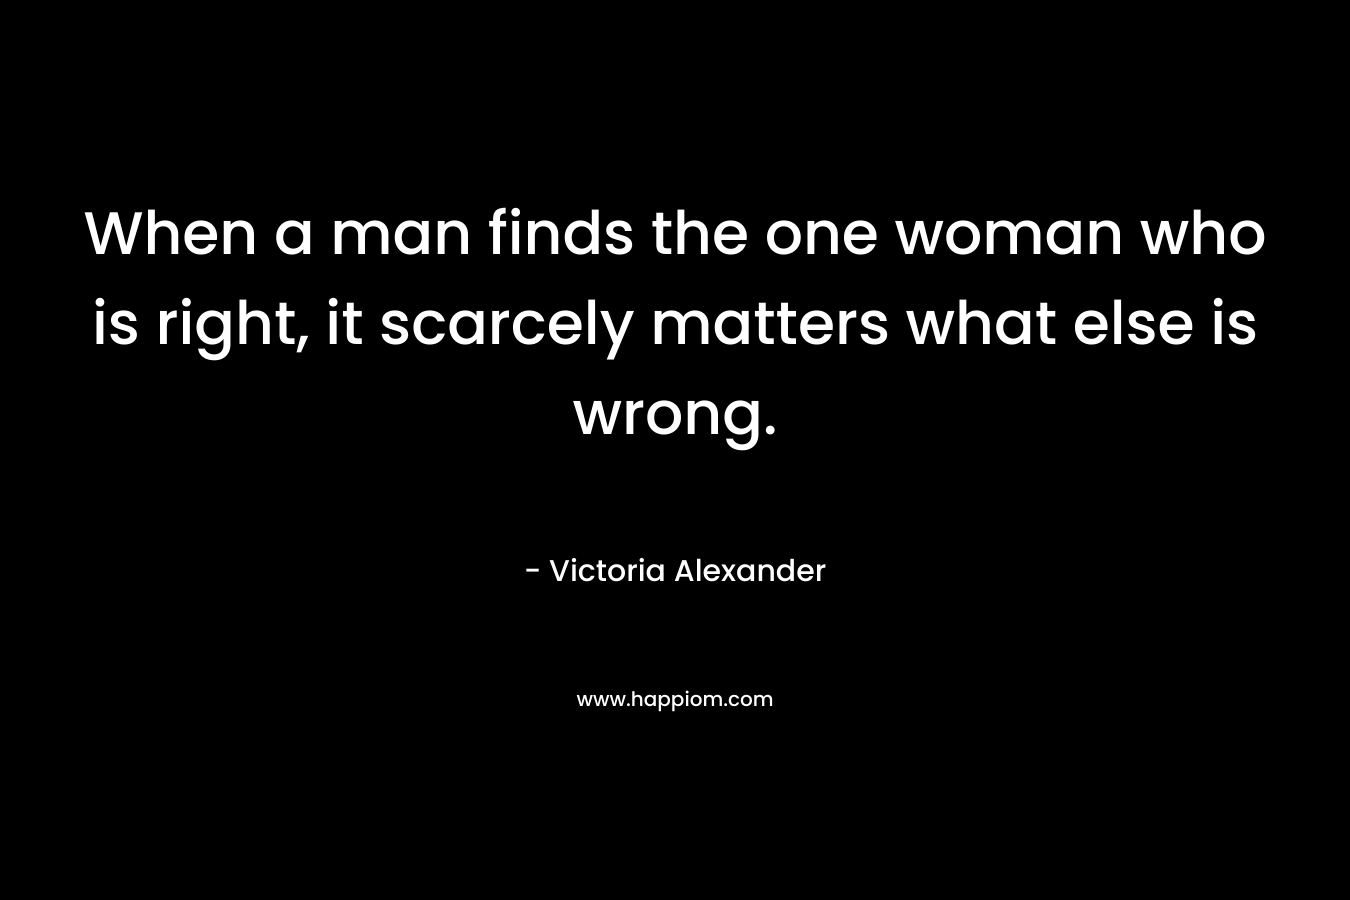 When a man finds the one woman who is right, it scarcely matters what else is wrong.